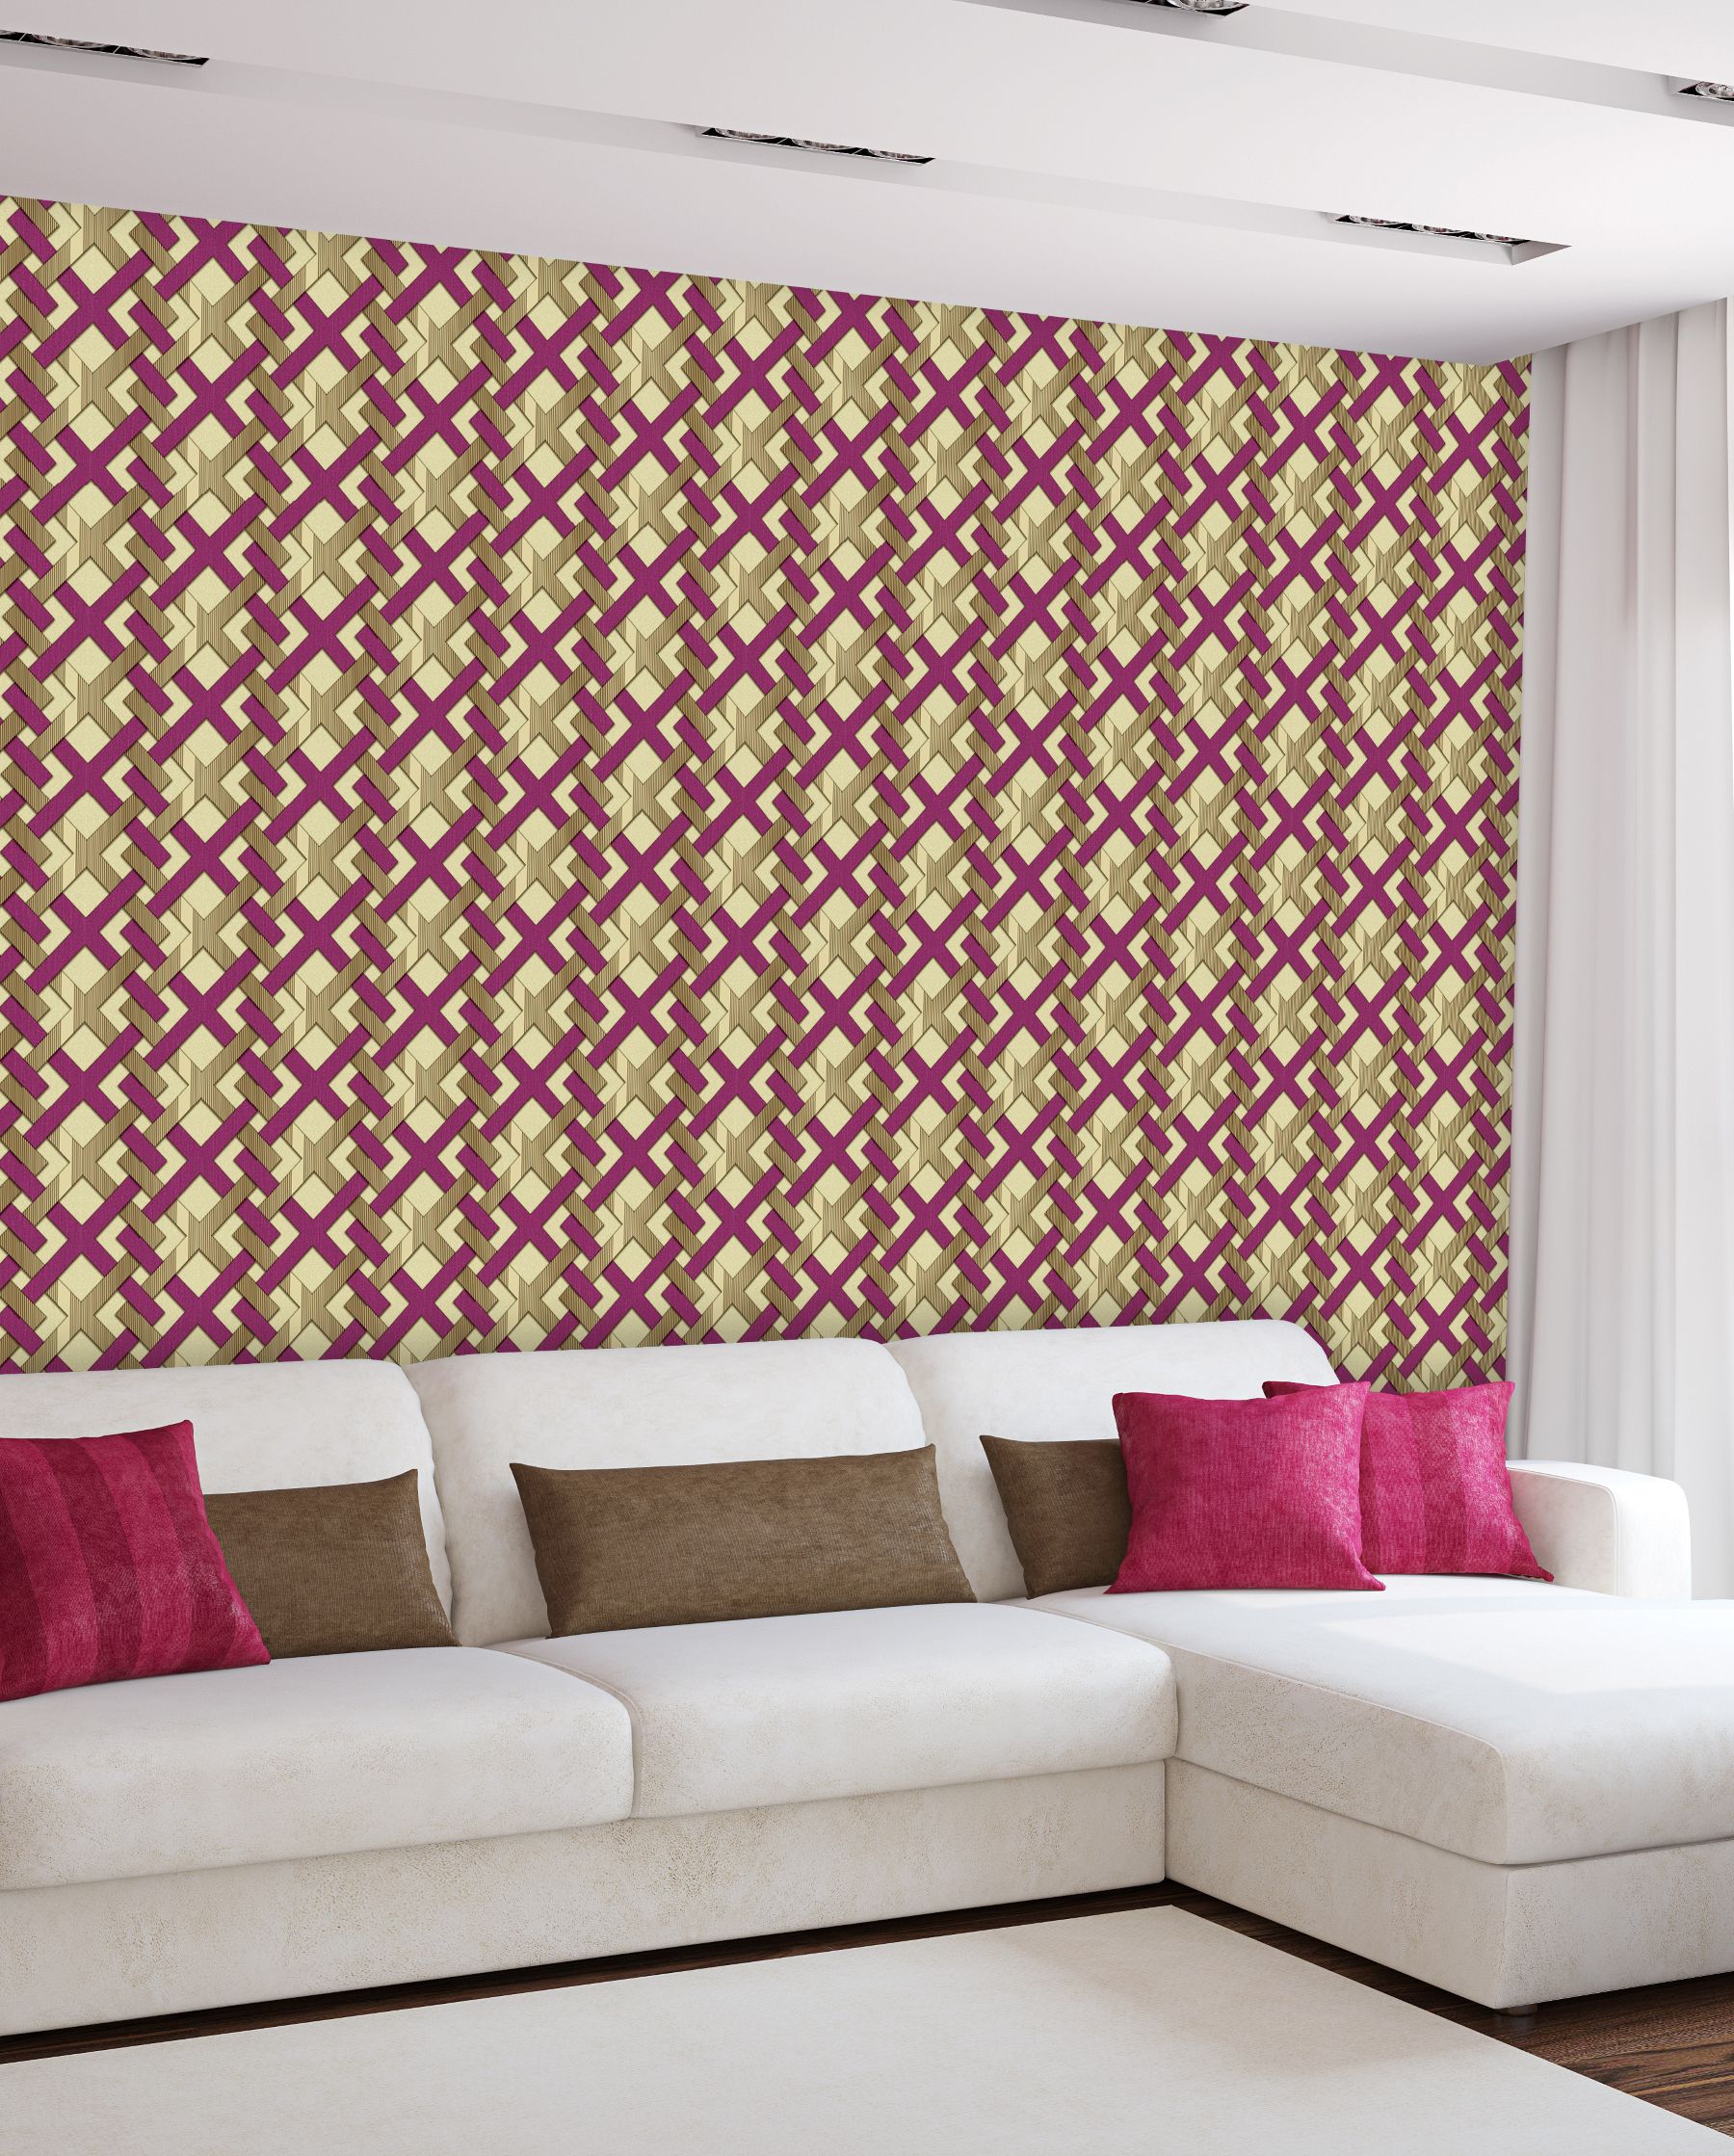 Artistic Vinyl Solid Wallpapers Golden Buy Artistic Vinyl Solid Wallpapers  Golden at Best Price in India on Snapdeal